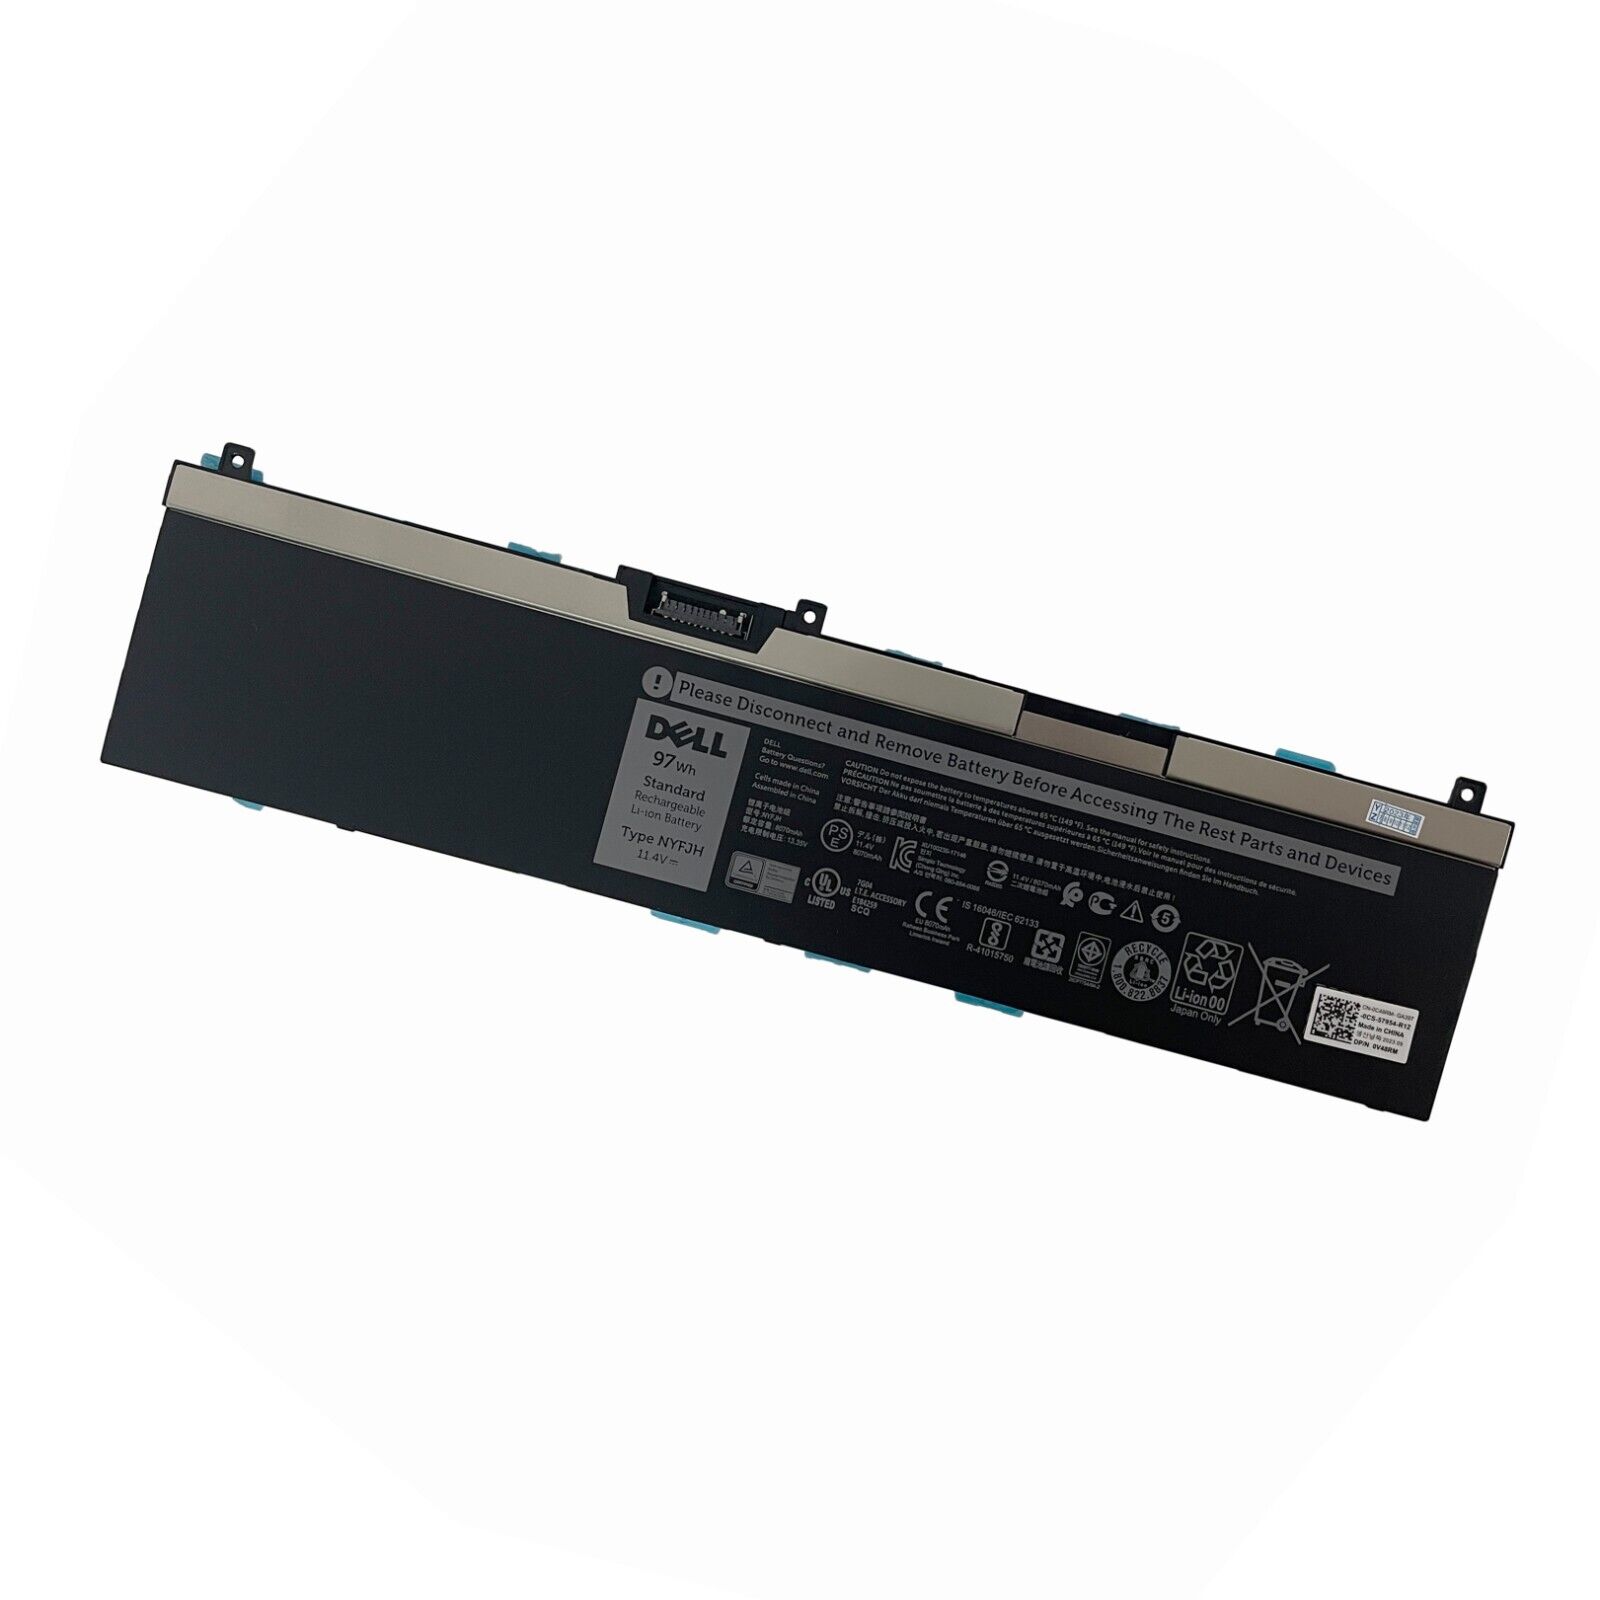 New Genuine 97WH NYFJH Laptop Battery For Dell Precision 7730 7530 7540 GW0K9 US